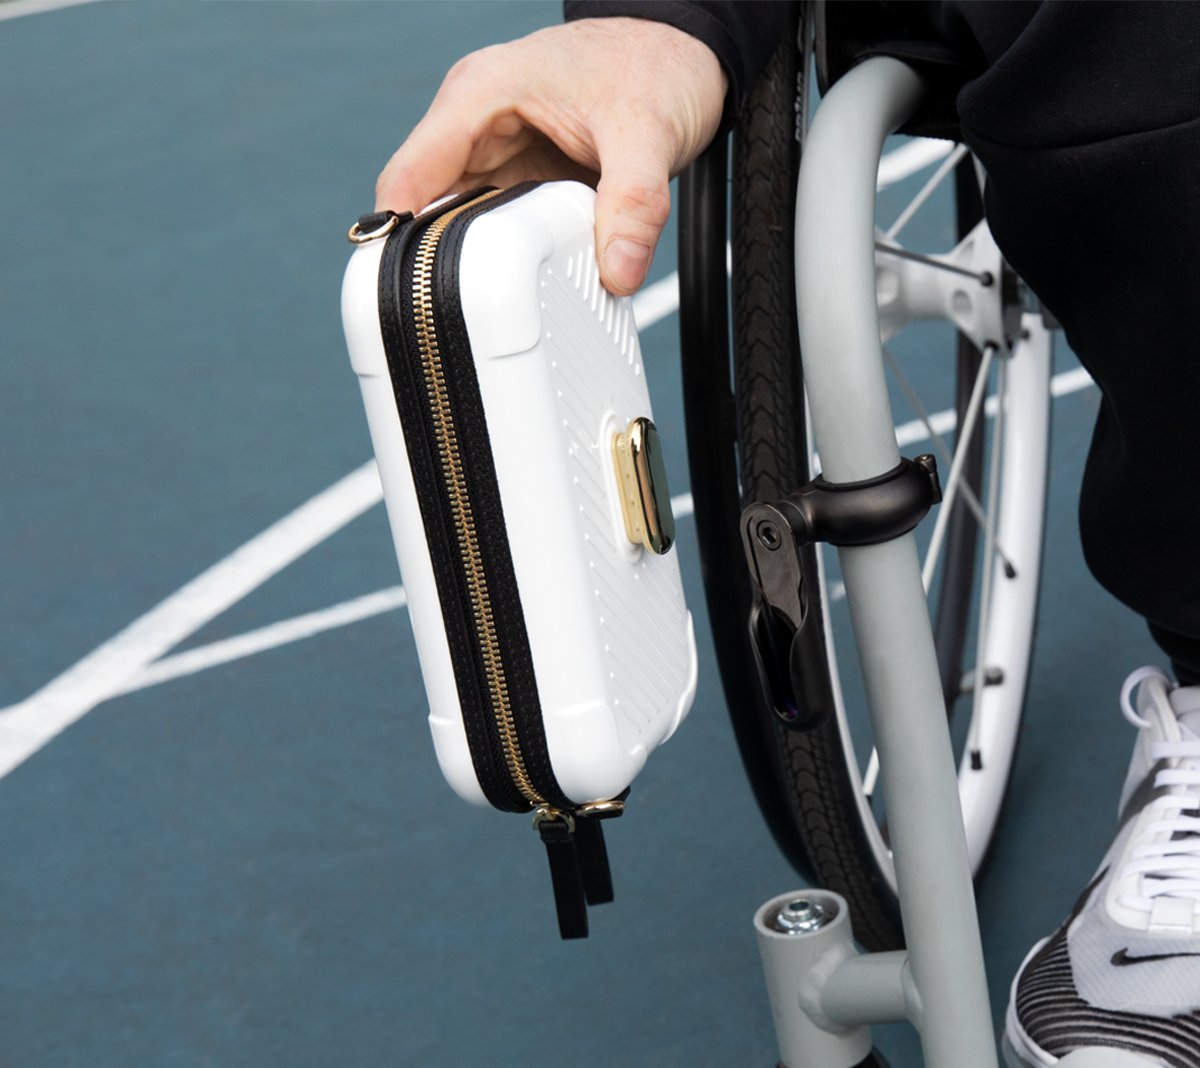 Meet Ffora, a Chic Accessory Line for Wheelchair Users - Fashionista